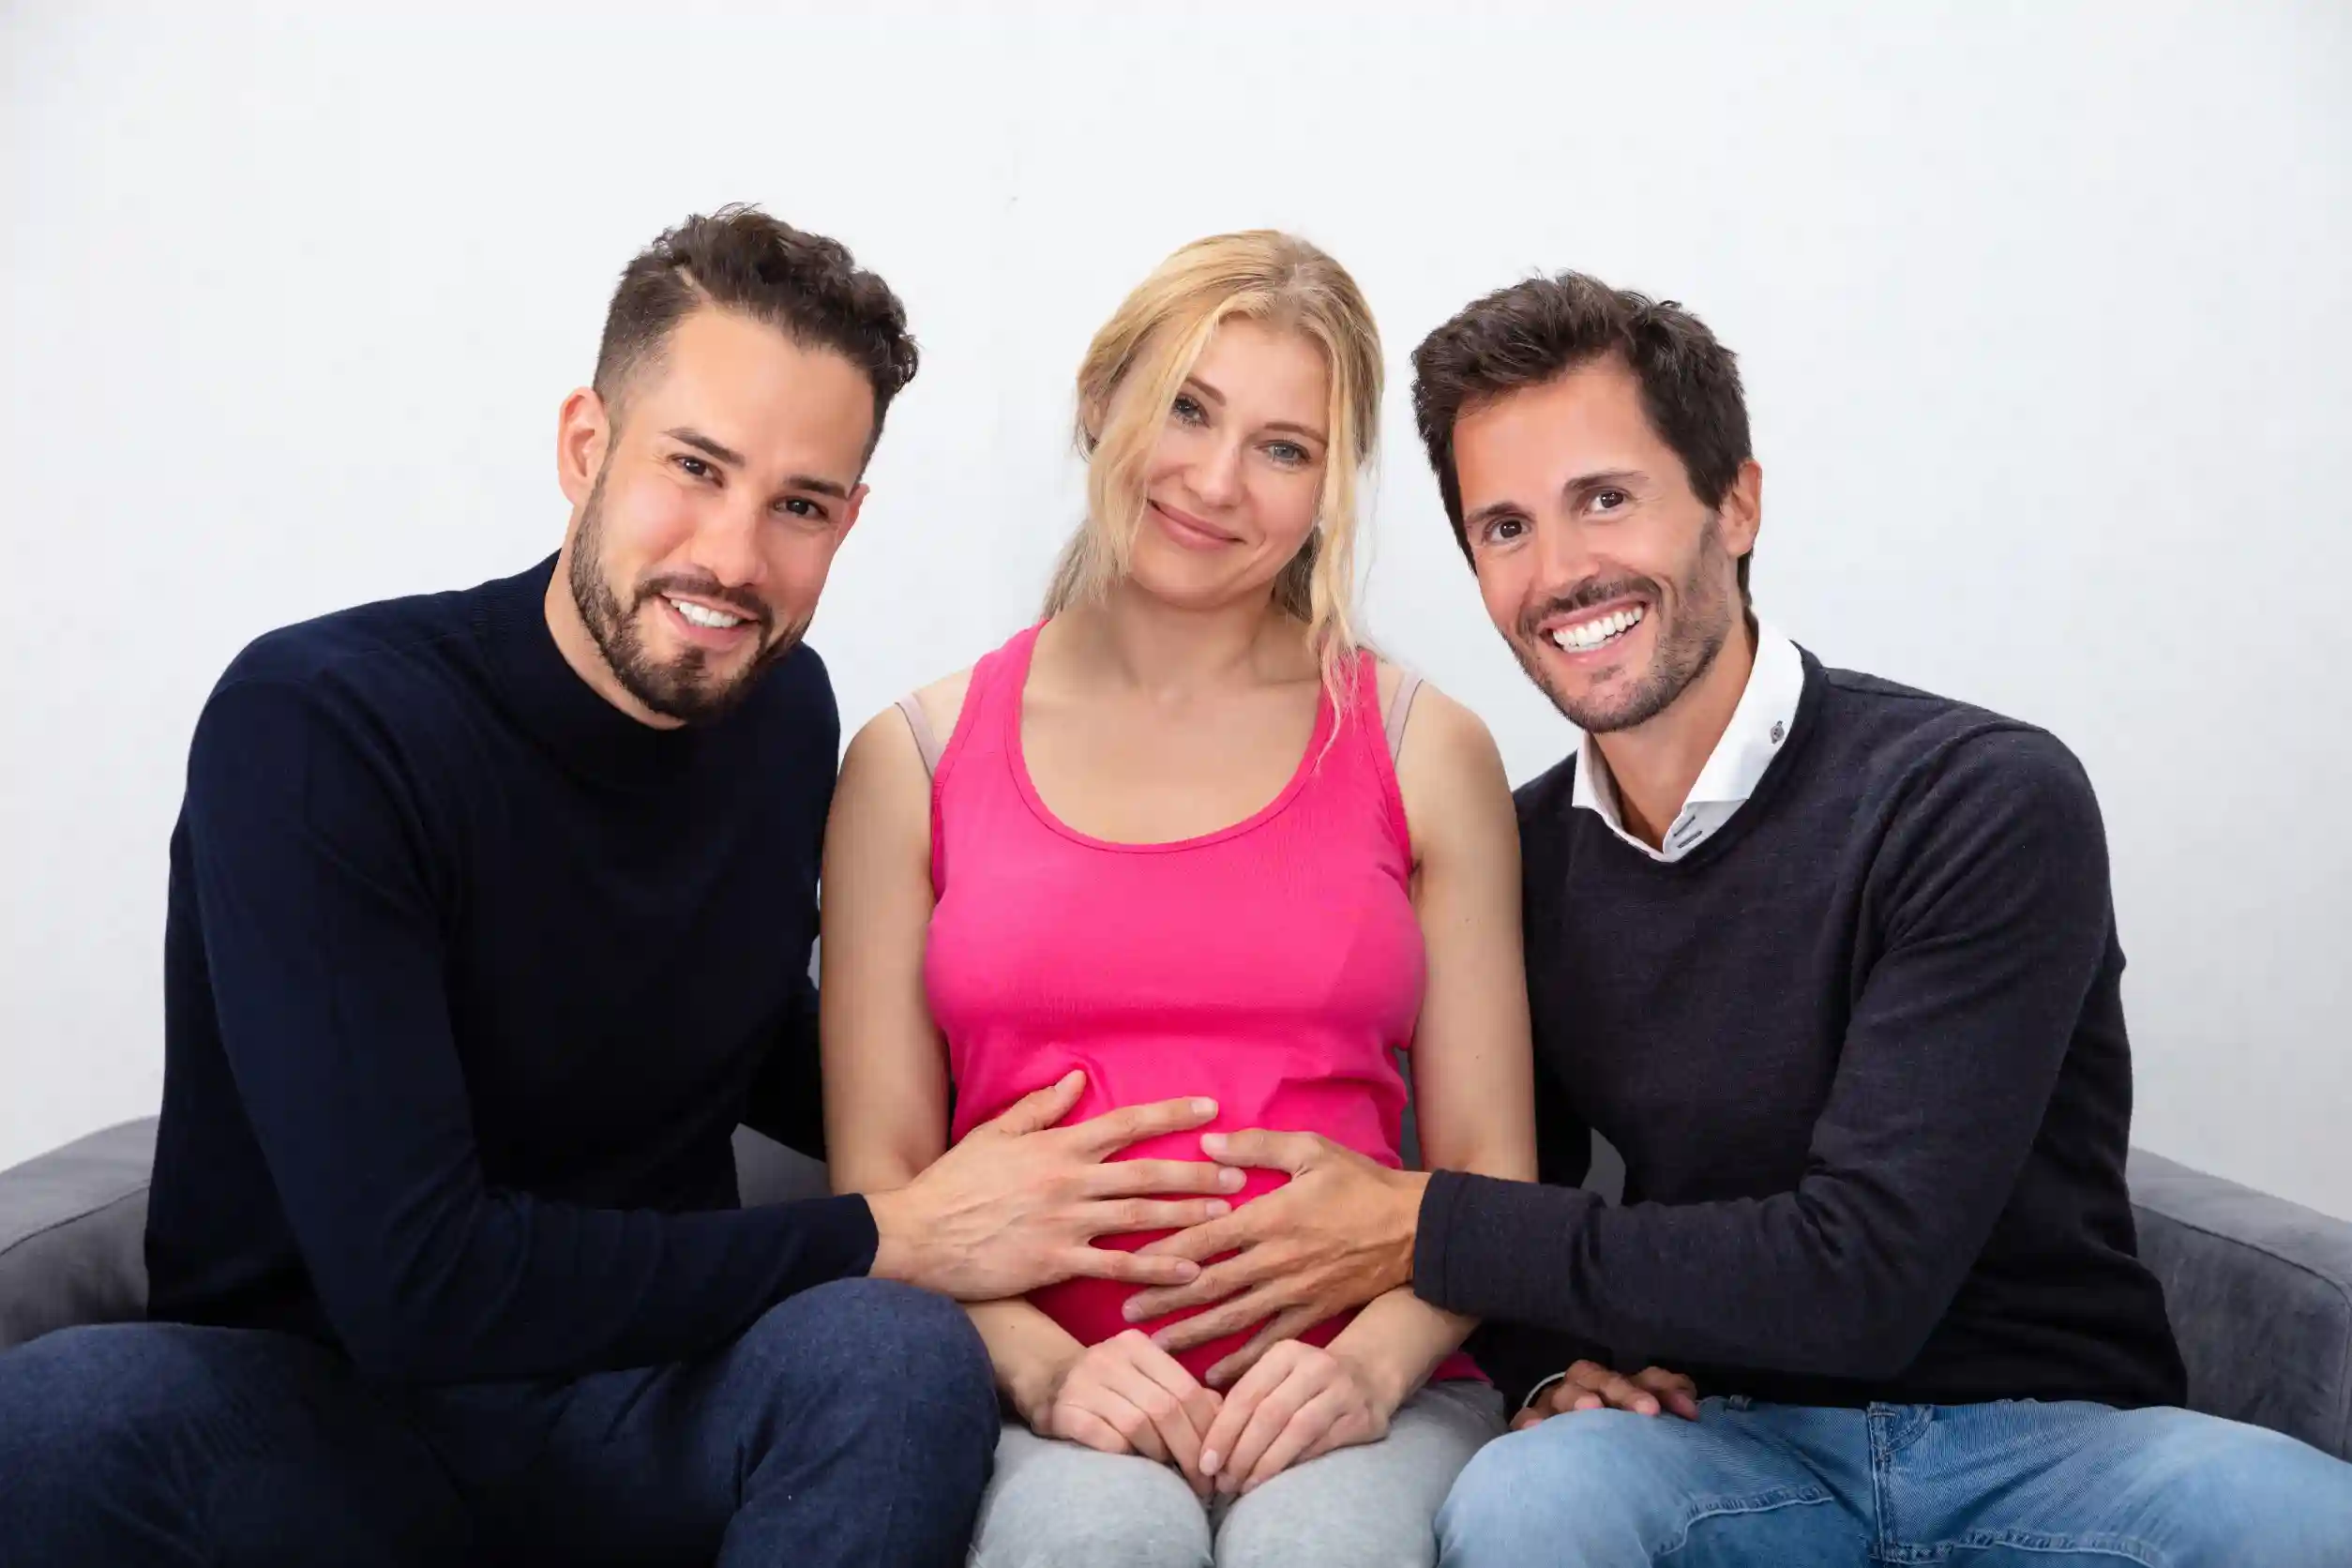 Portrait Of Smiling Men Touching The Belly Of Pregnant Surrogate Woman